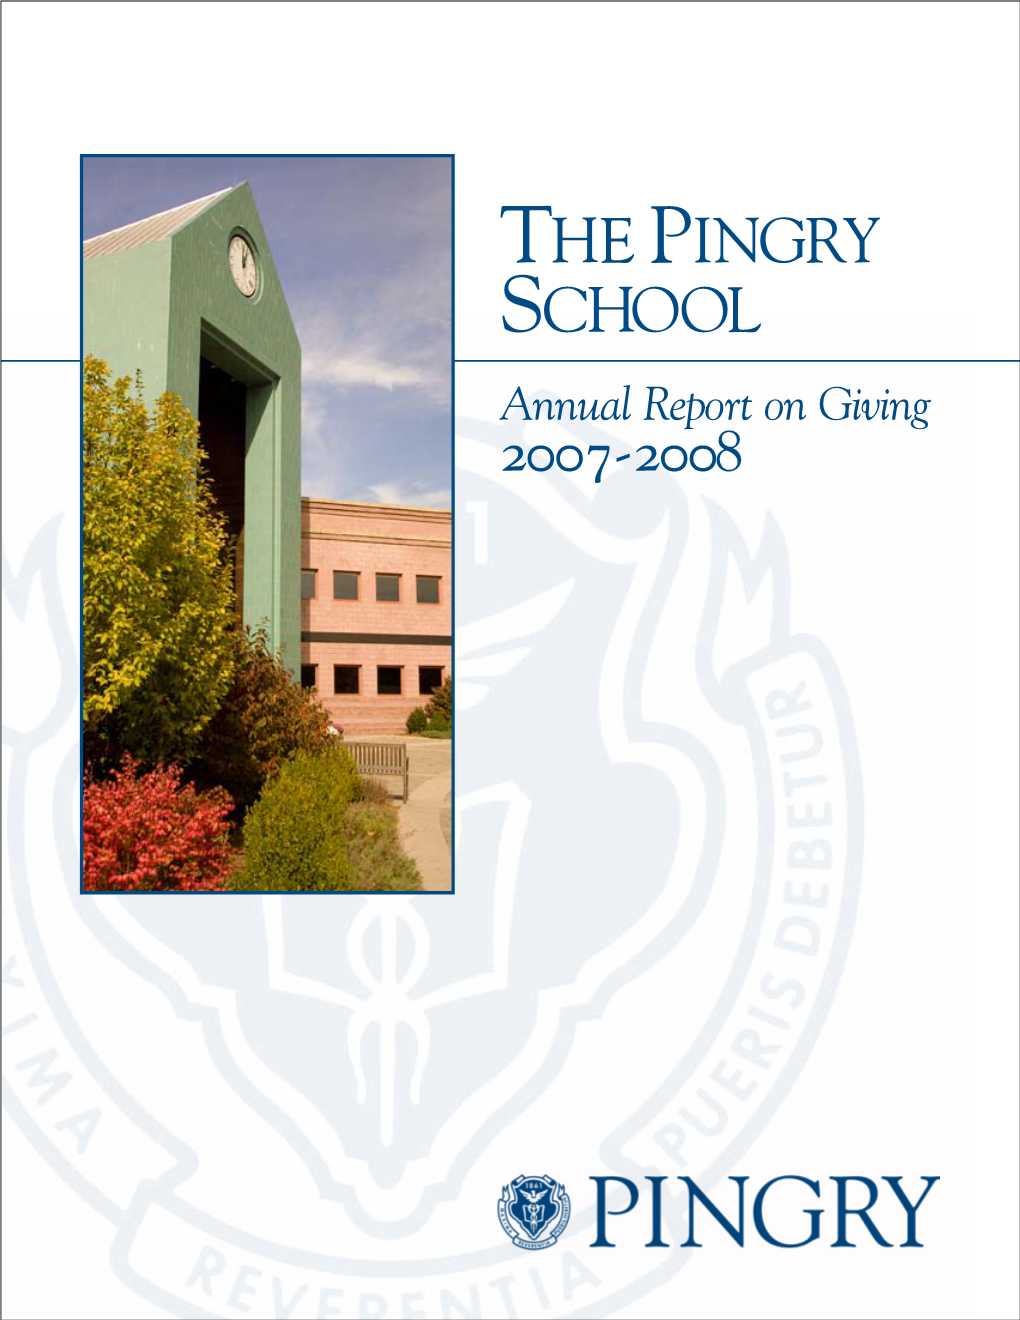 Annual Report on Giving 2007-2008